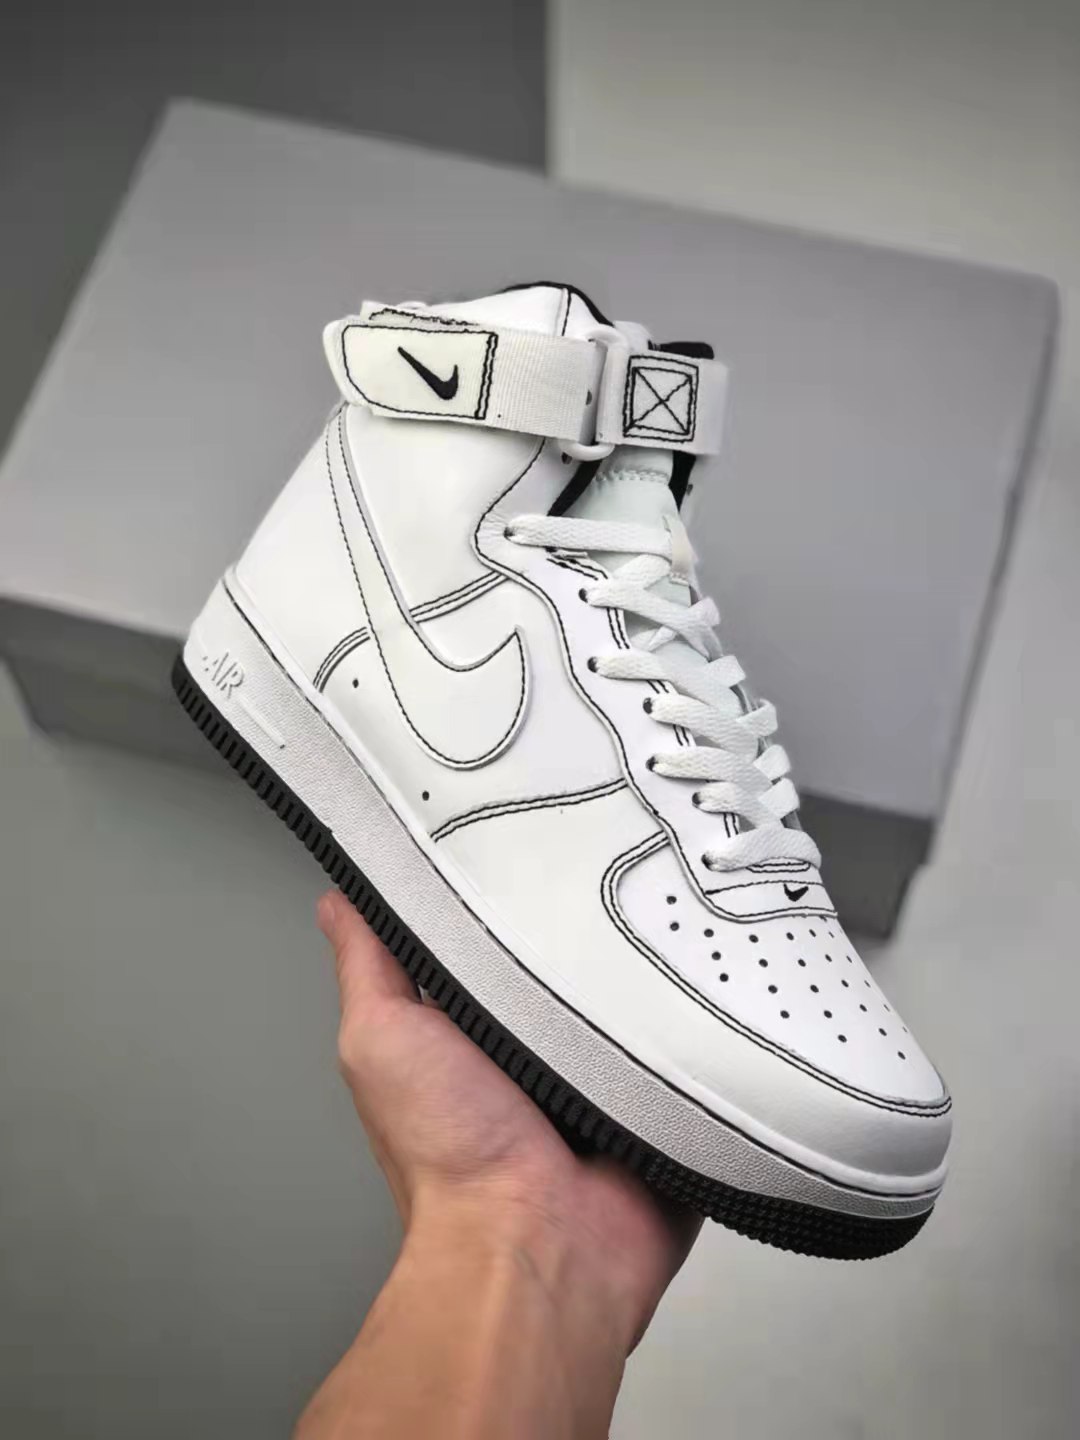 Nike Air Force 1 High 07 White Black CV1753-104 - Stylish and Classic Men's Sneakers